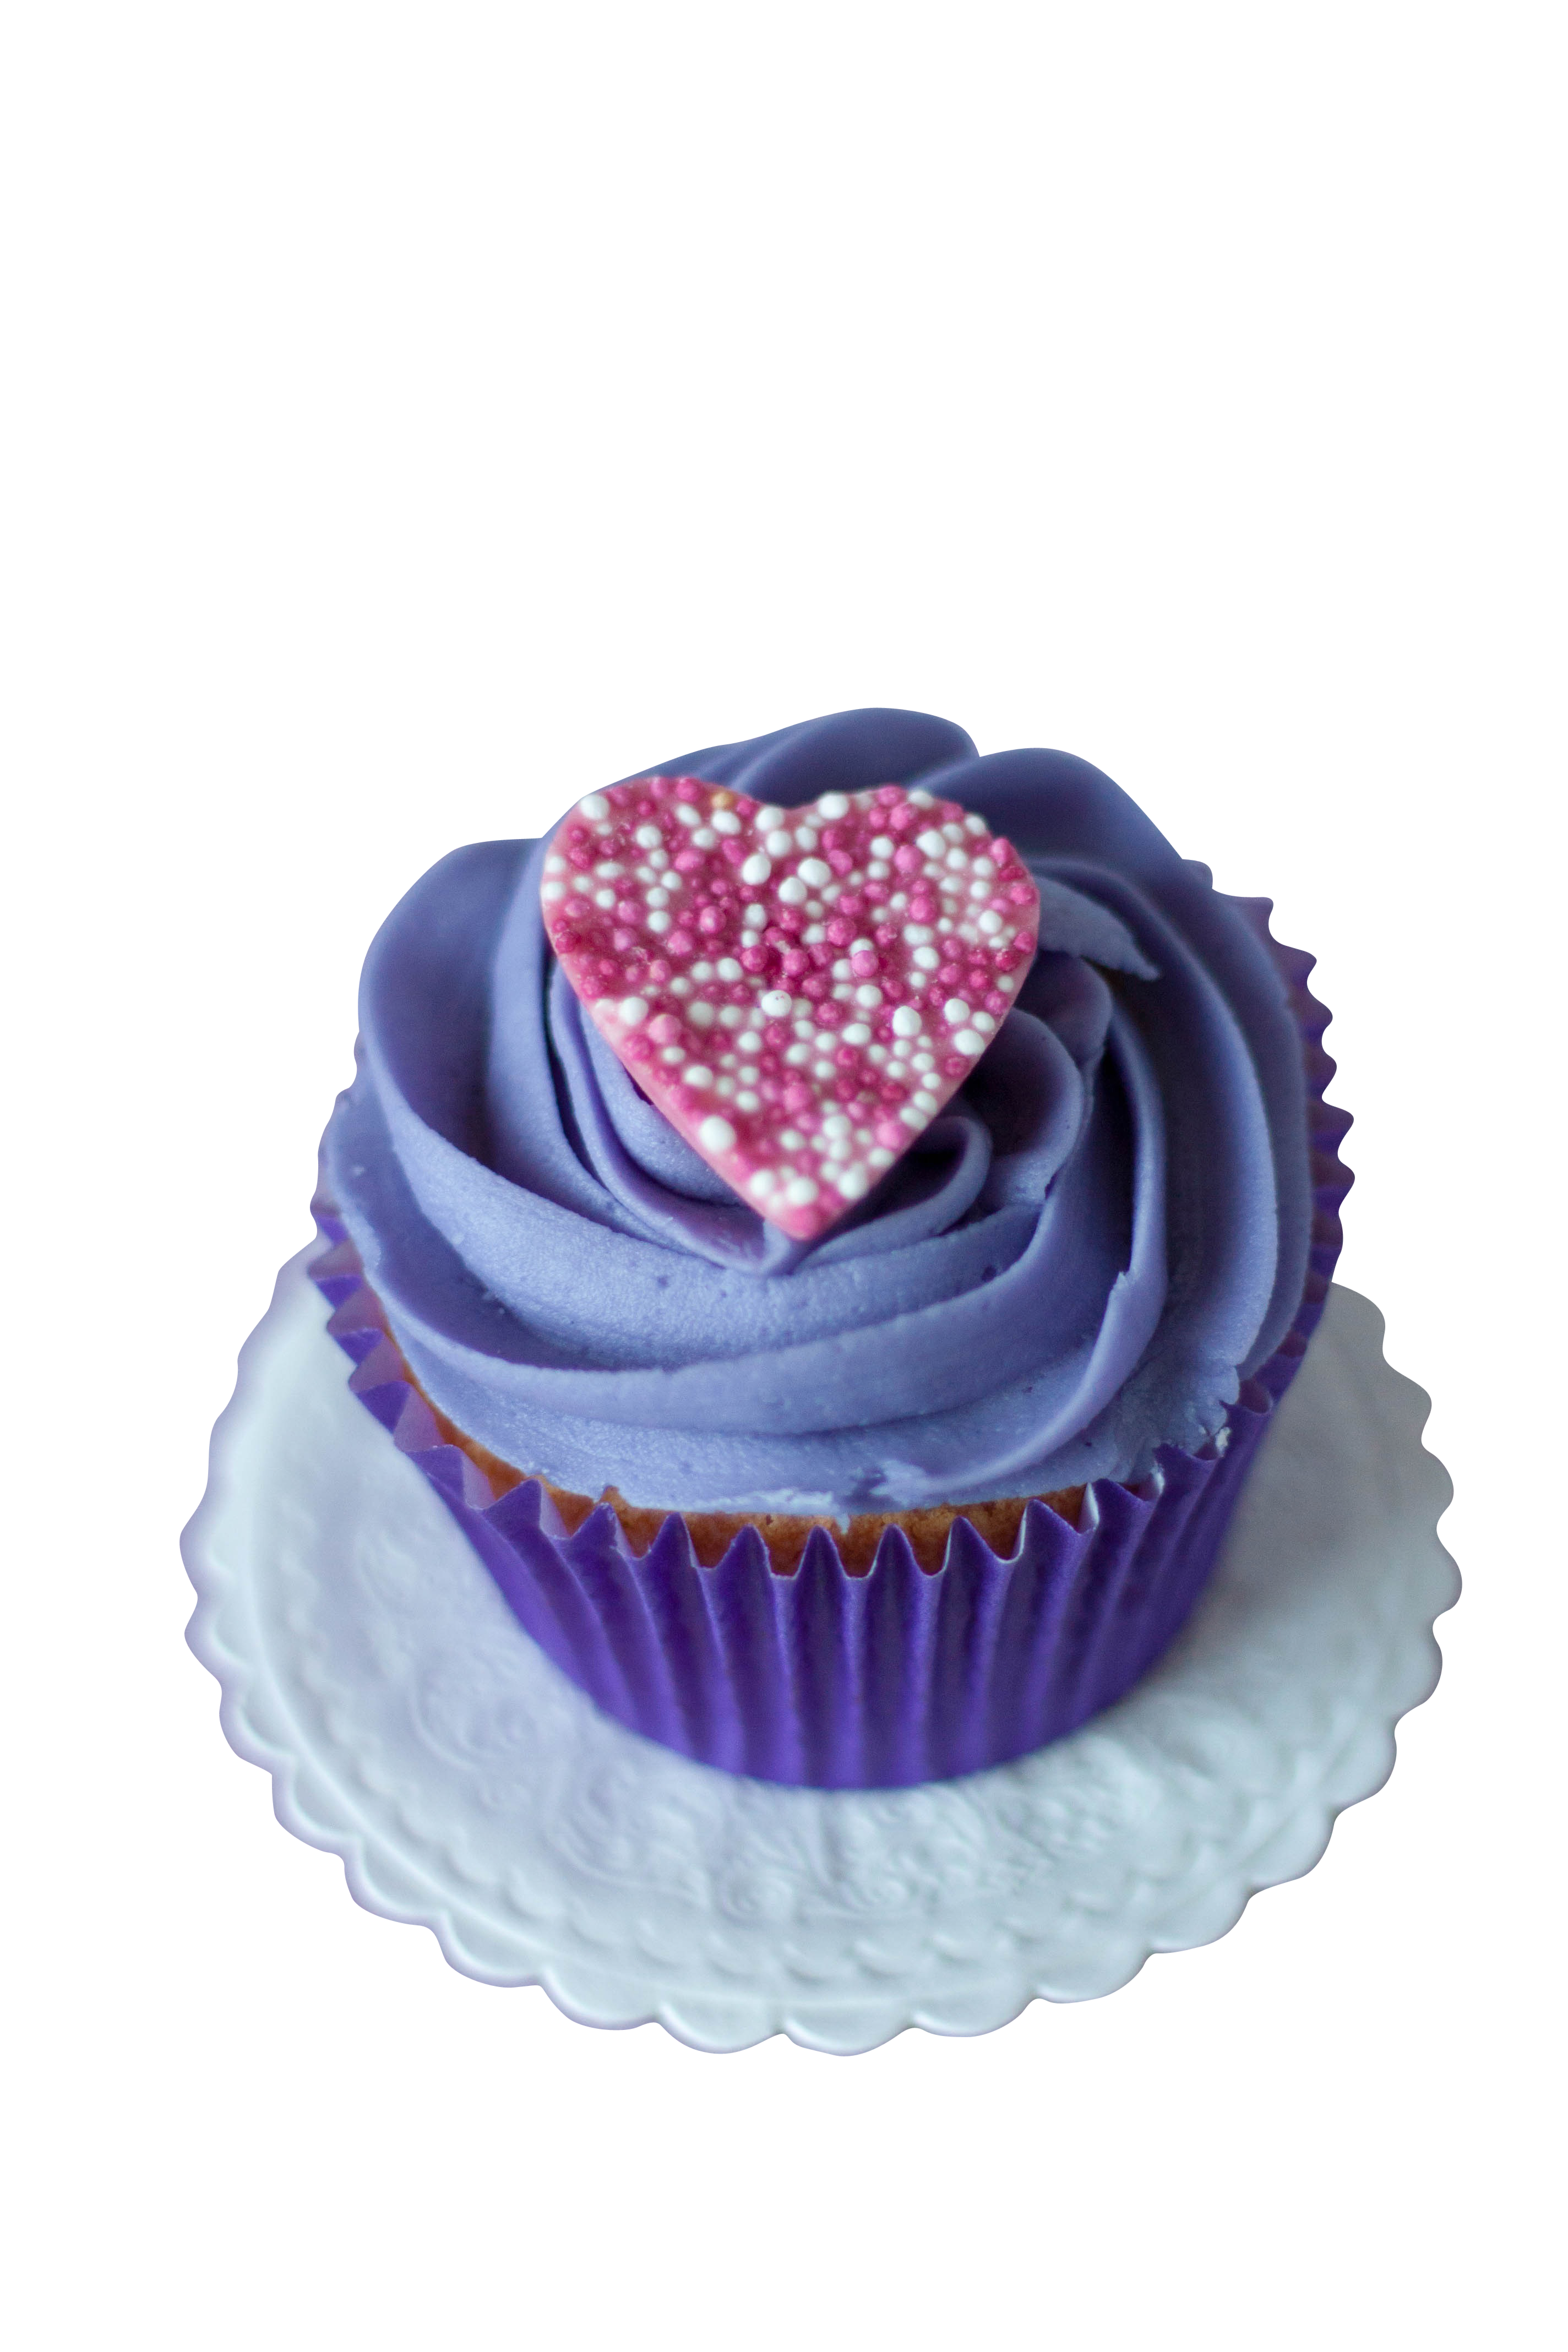 A Cupcake With Purple Frosting And A Heart On Top